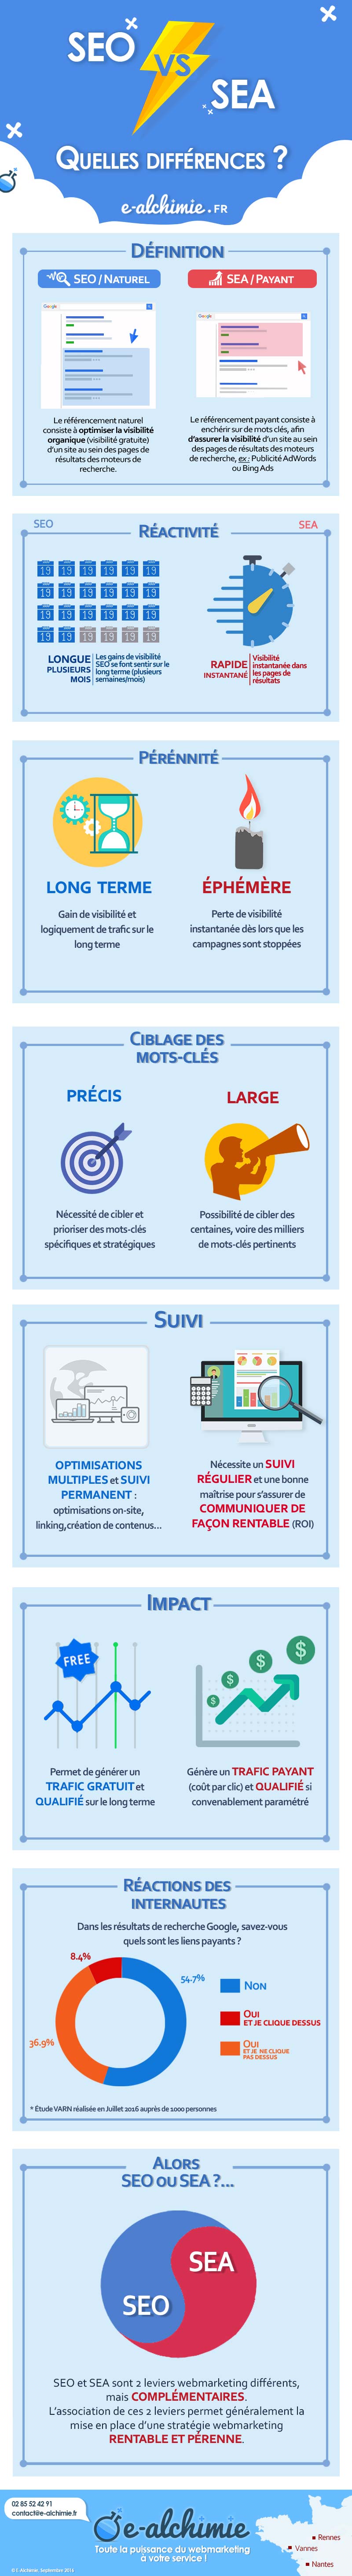 infographie-difference-seo-vs-sea